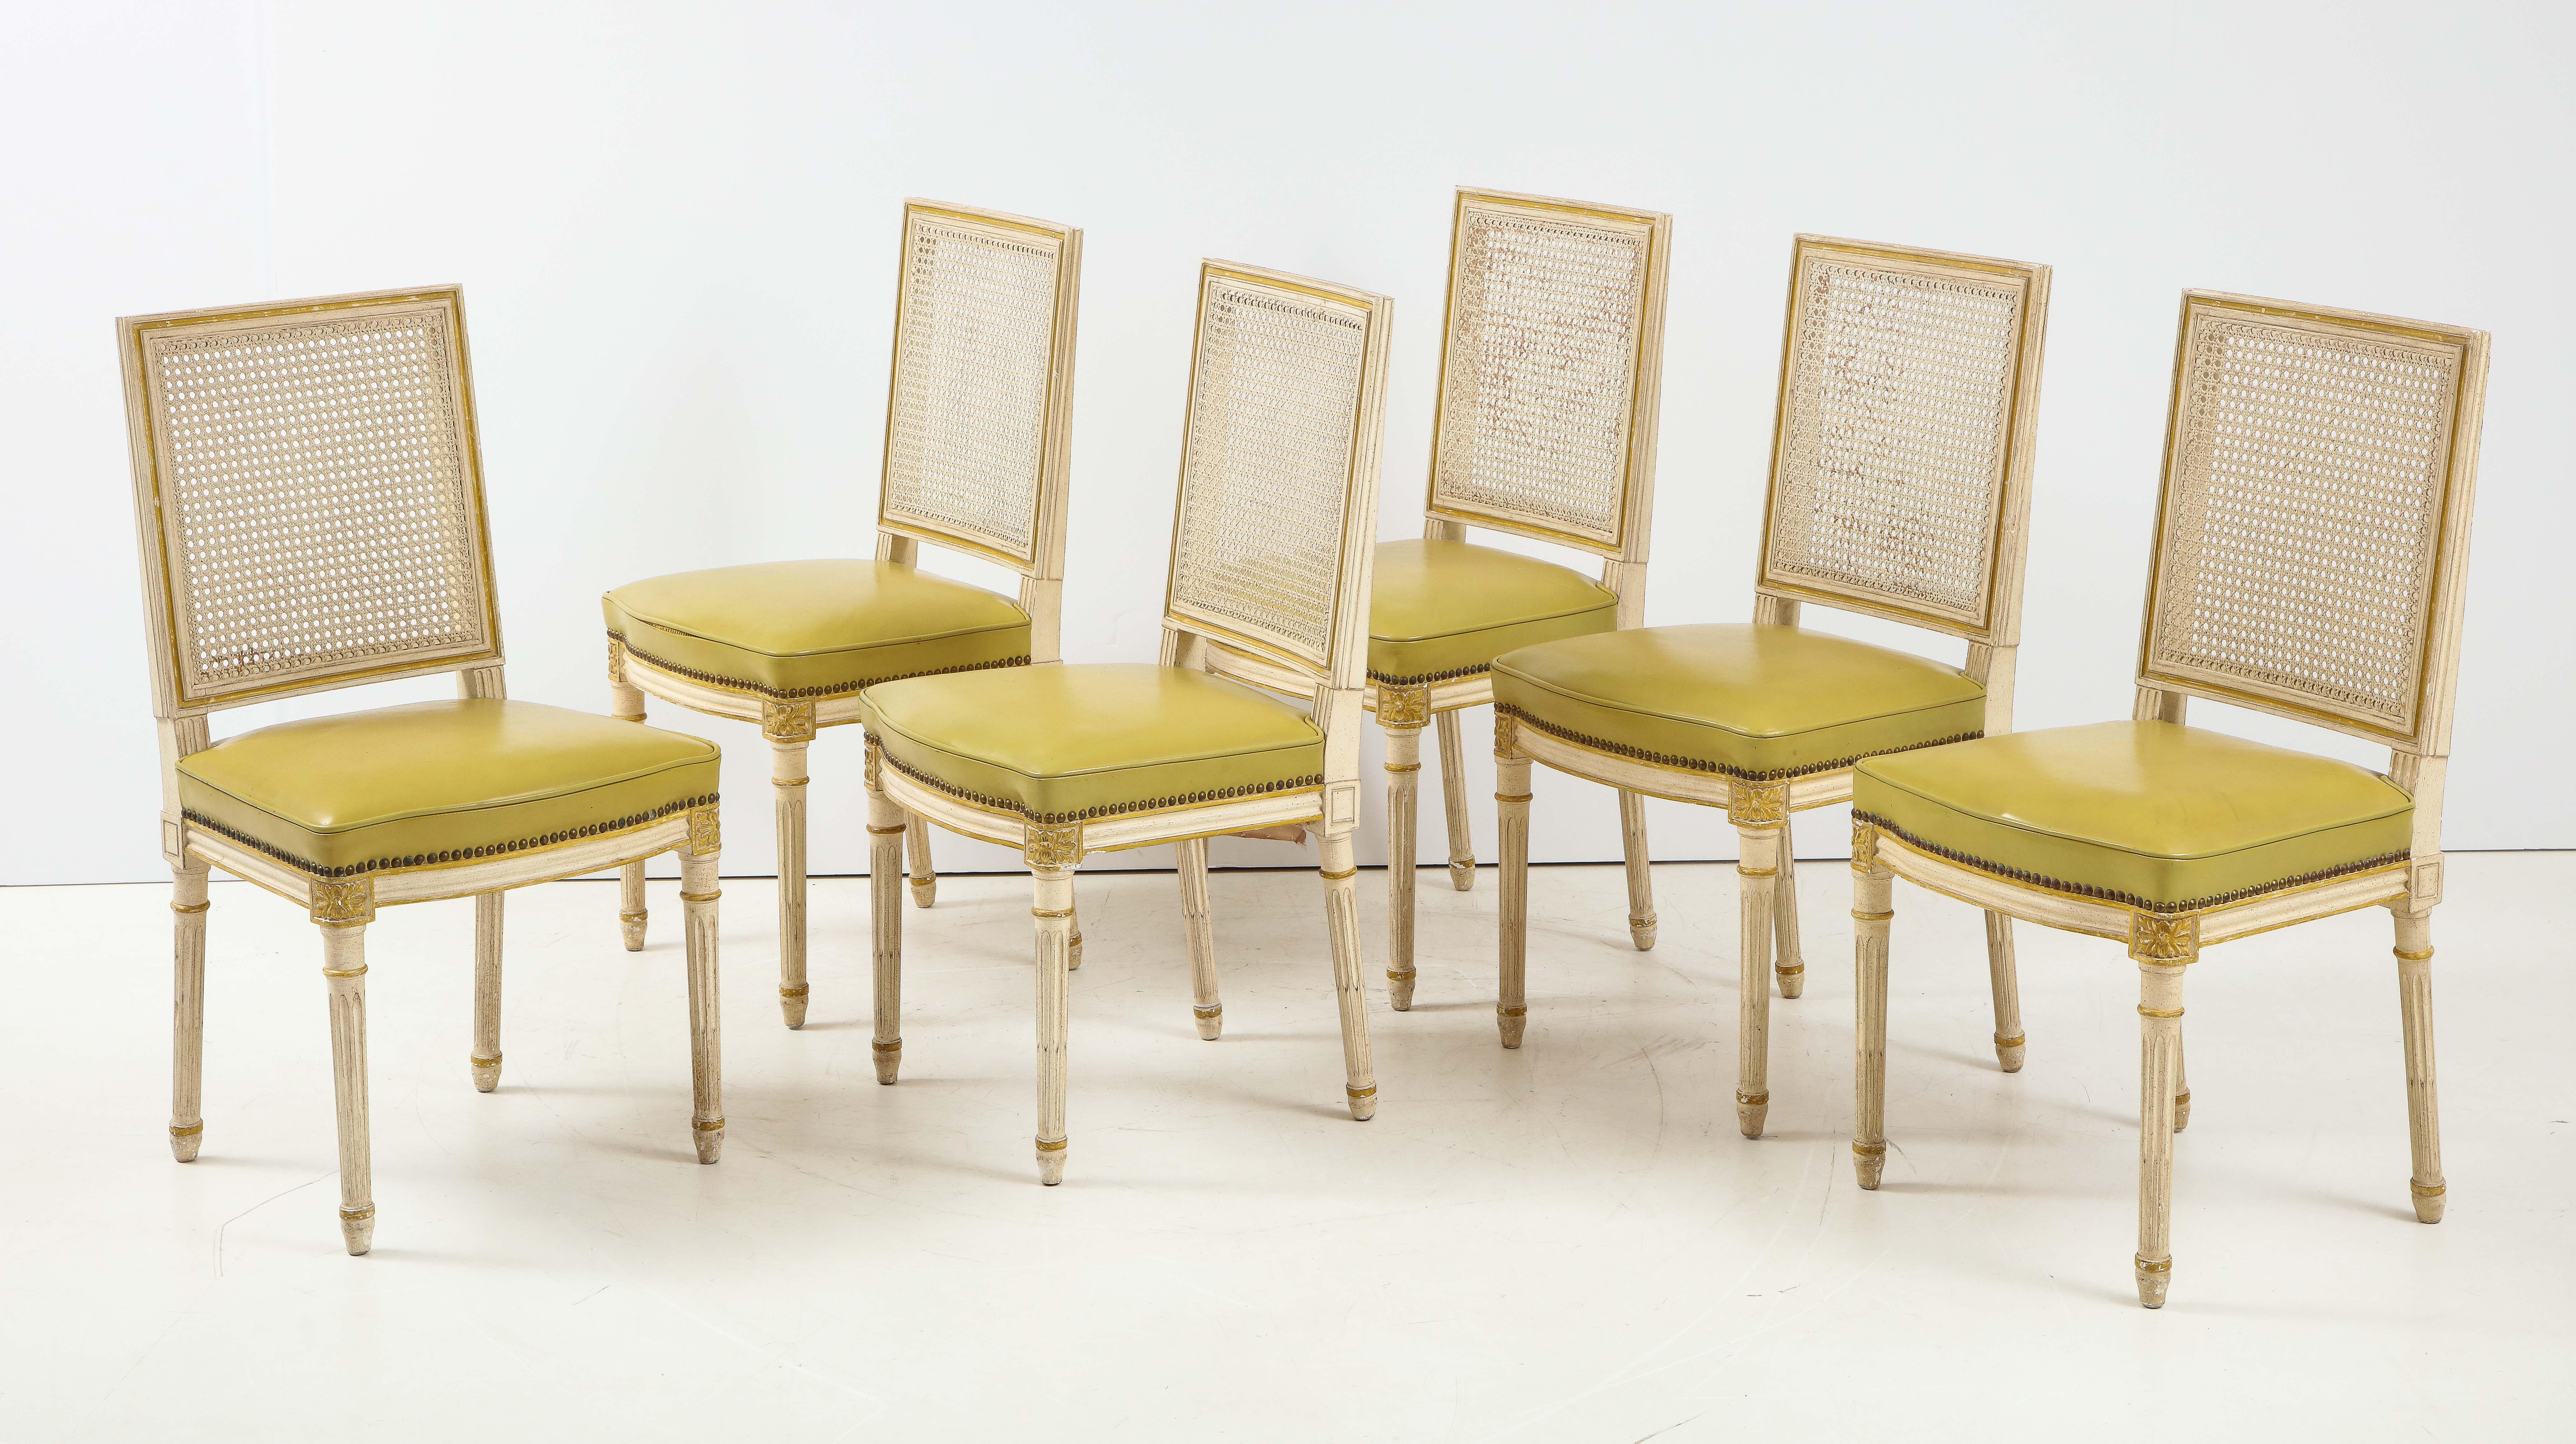 A set of stylish dining chairs made by Maison Jansen, Paris. The Lous XVI style chairs are painted in a washed white finish with subtle accents in a chartreuse color. The chairs feature a caned back and seats finished in a green faux leather trimmed